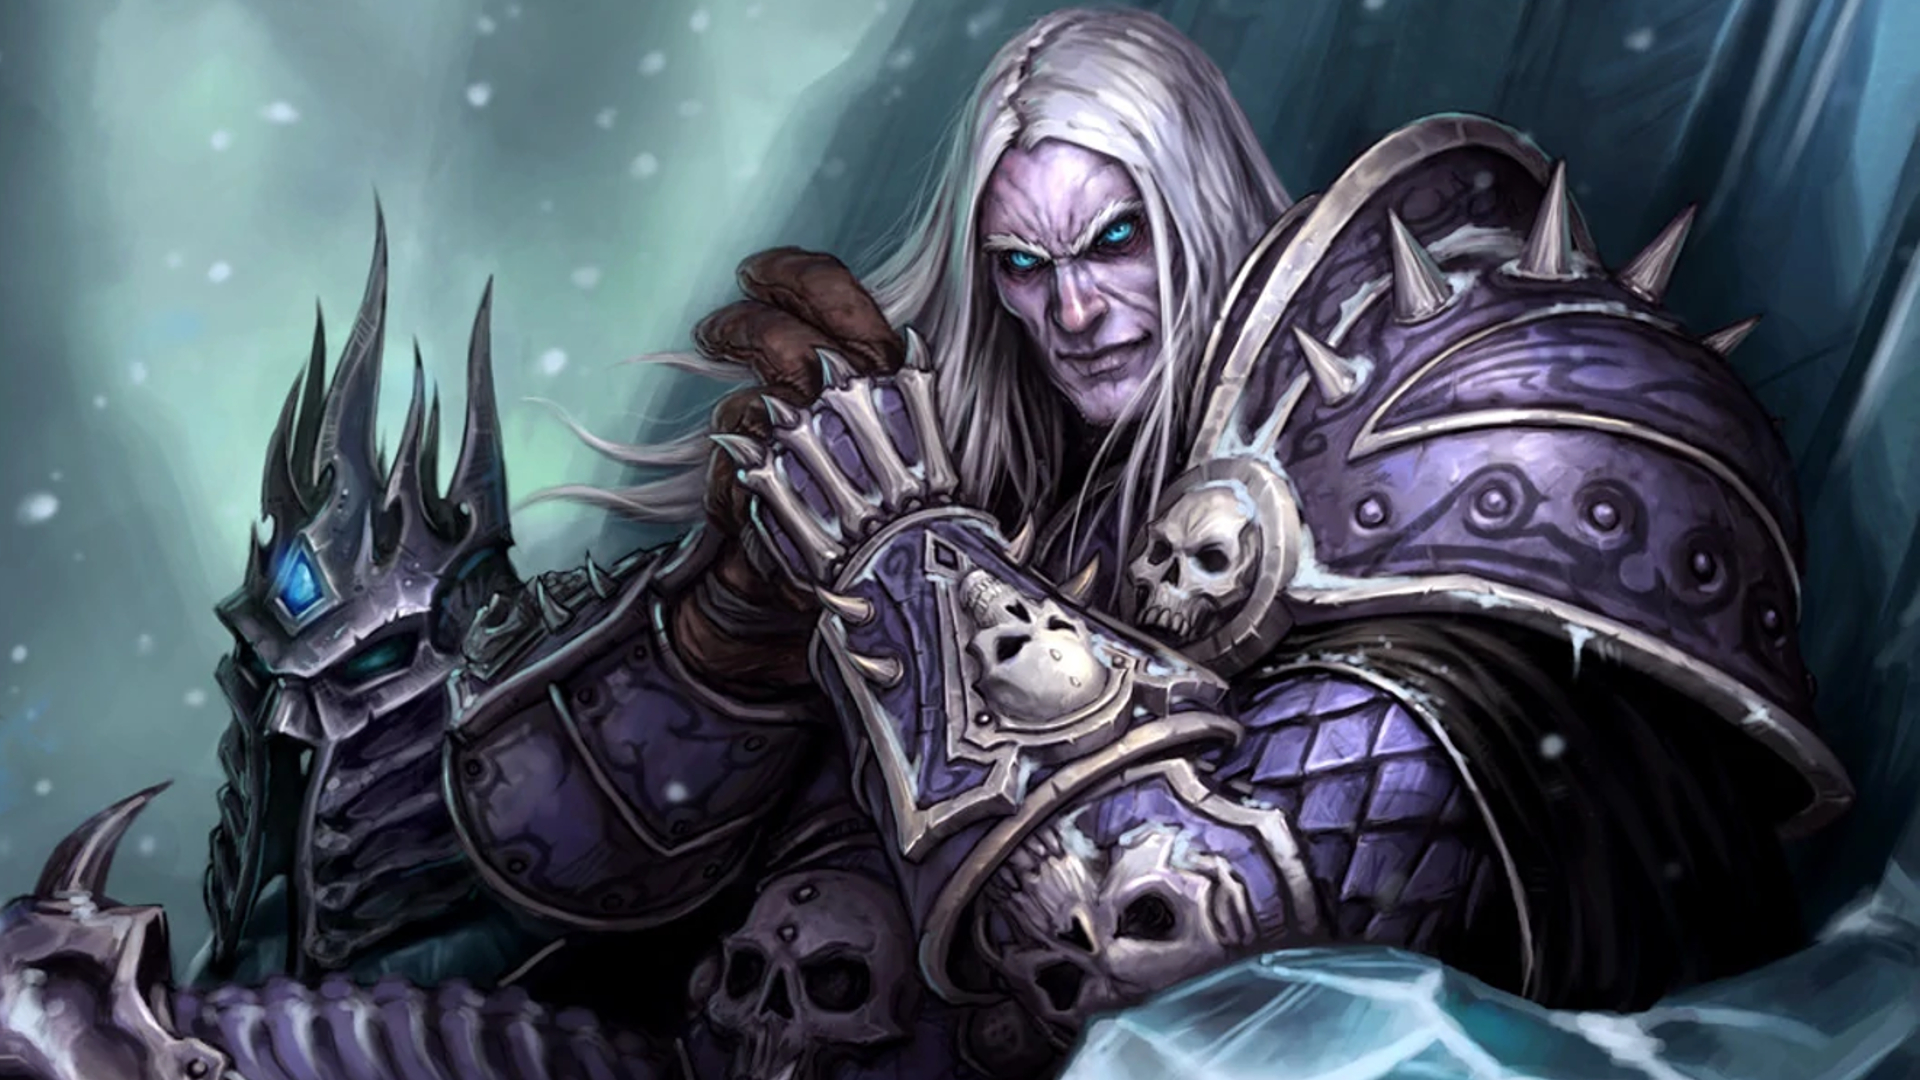 WoW Wrath of the Lich King Classic release times and preload details